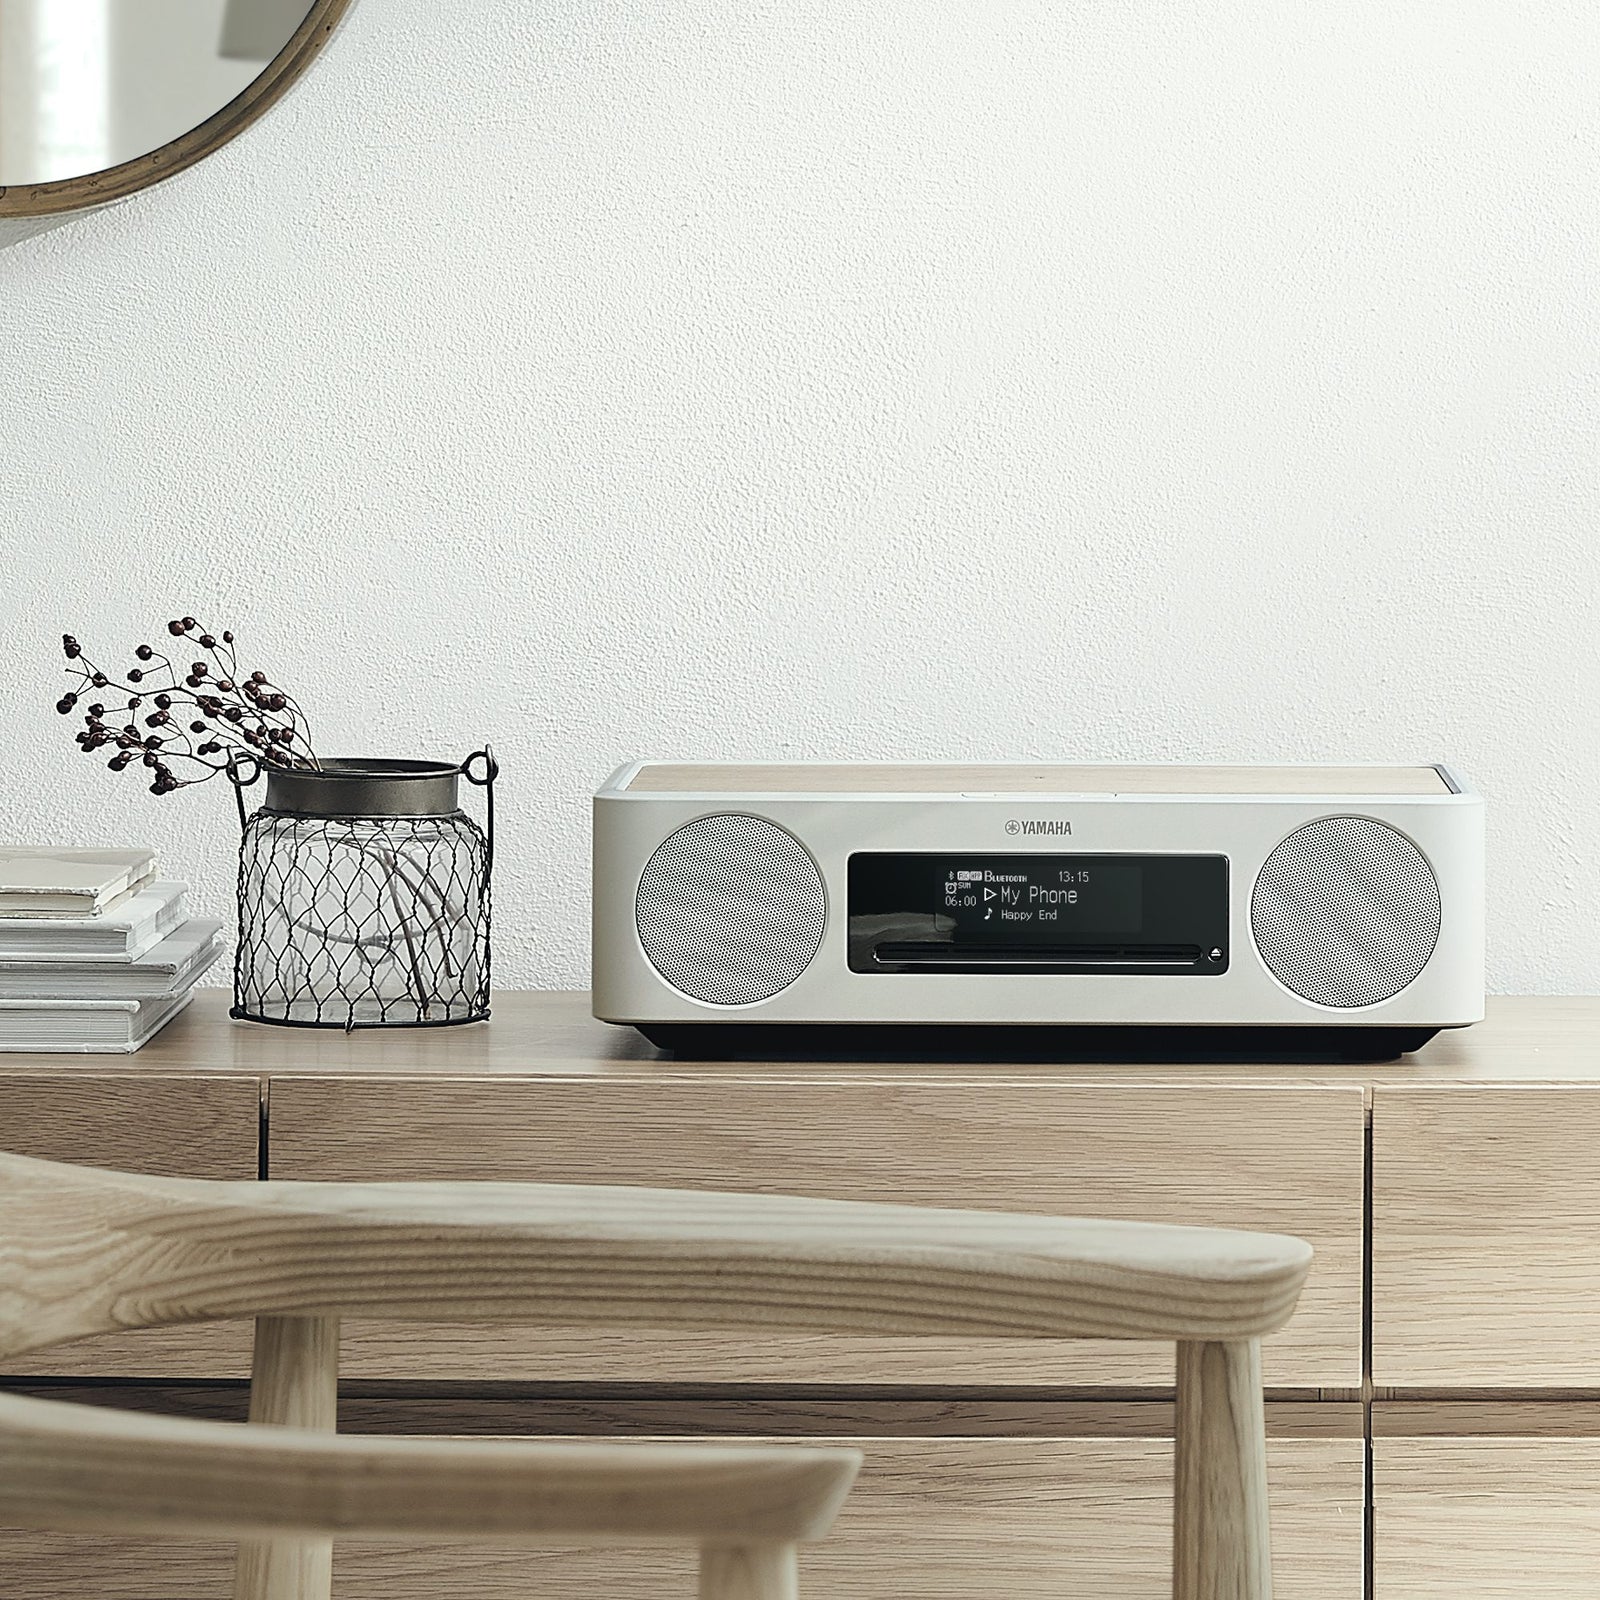 Yamaha TSX-B237 - Desktop Audio with all your favorite music. With a shape you'll come to love. The TSX-B237 makes your day even better. SIMPLICITY Find yourself right where you are Makes your whole day worthwhile Comfort, beauty and peace